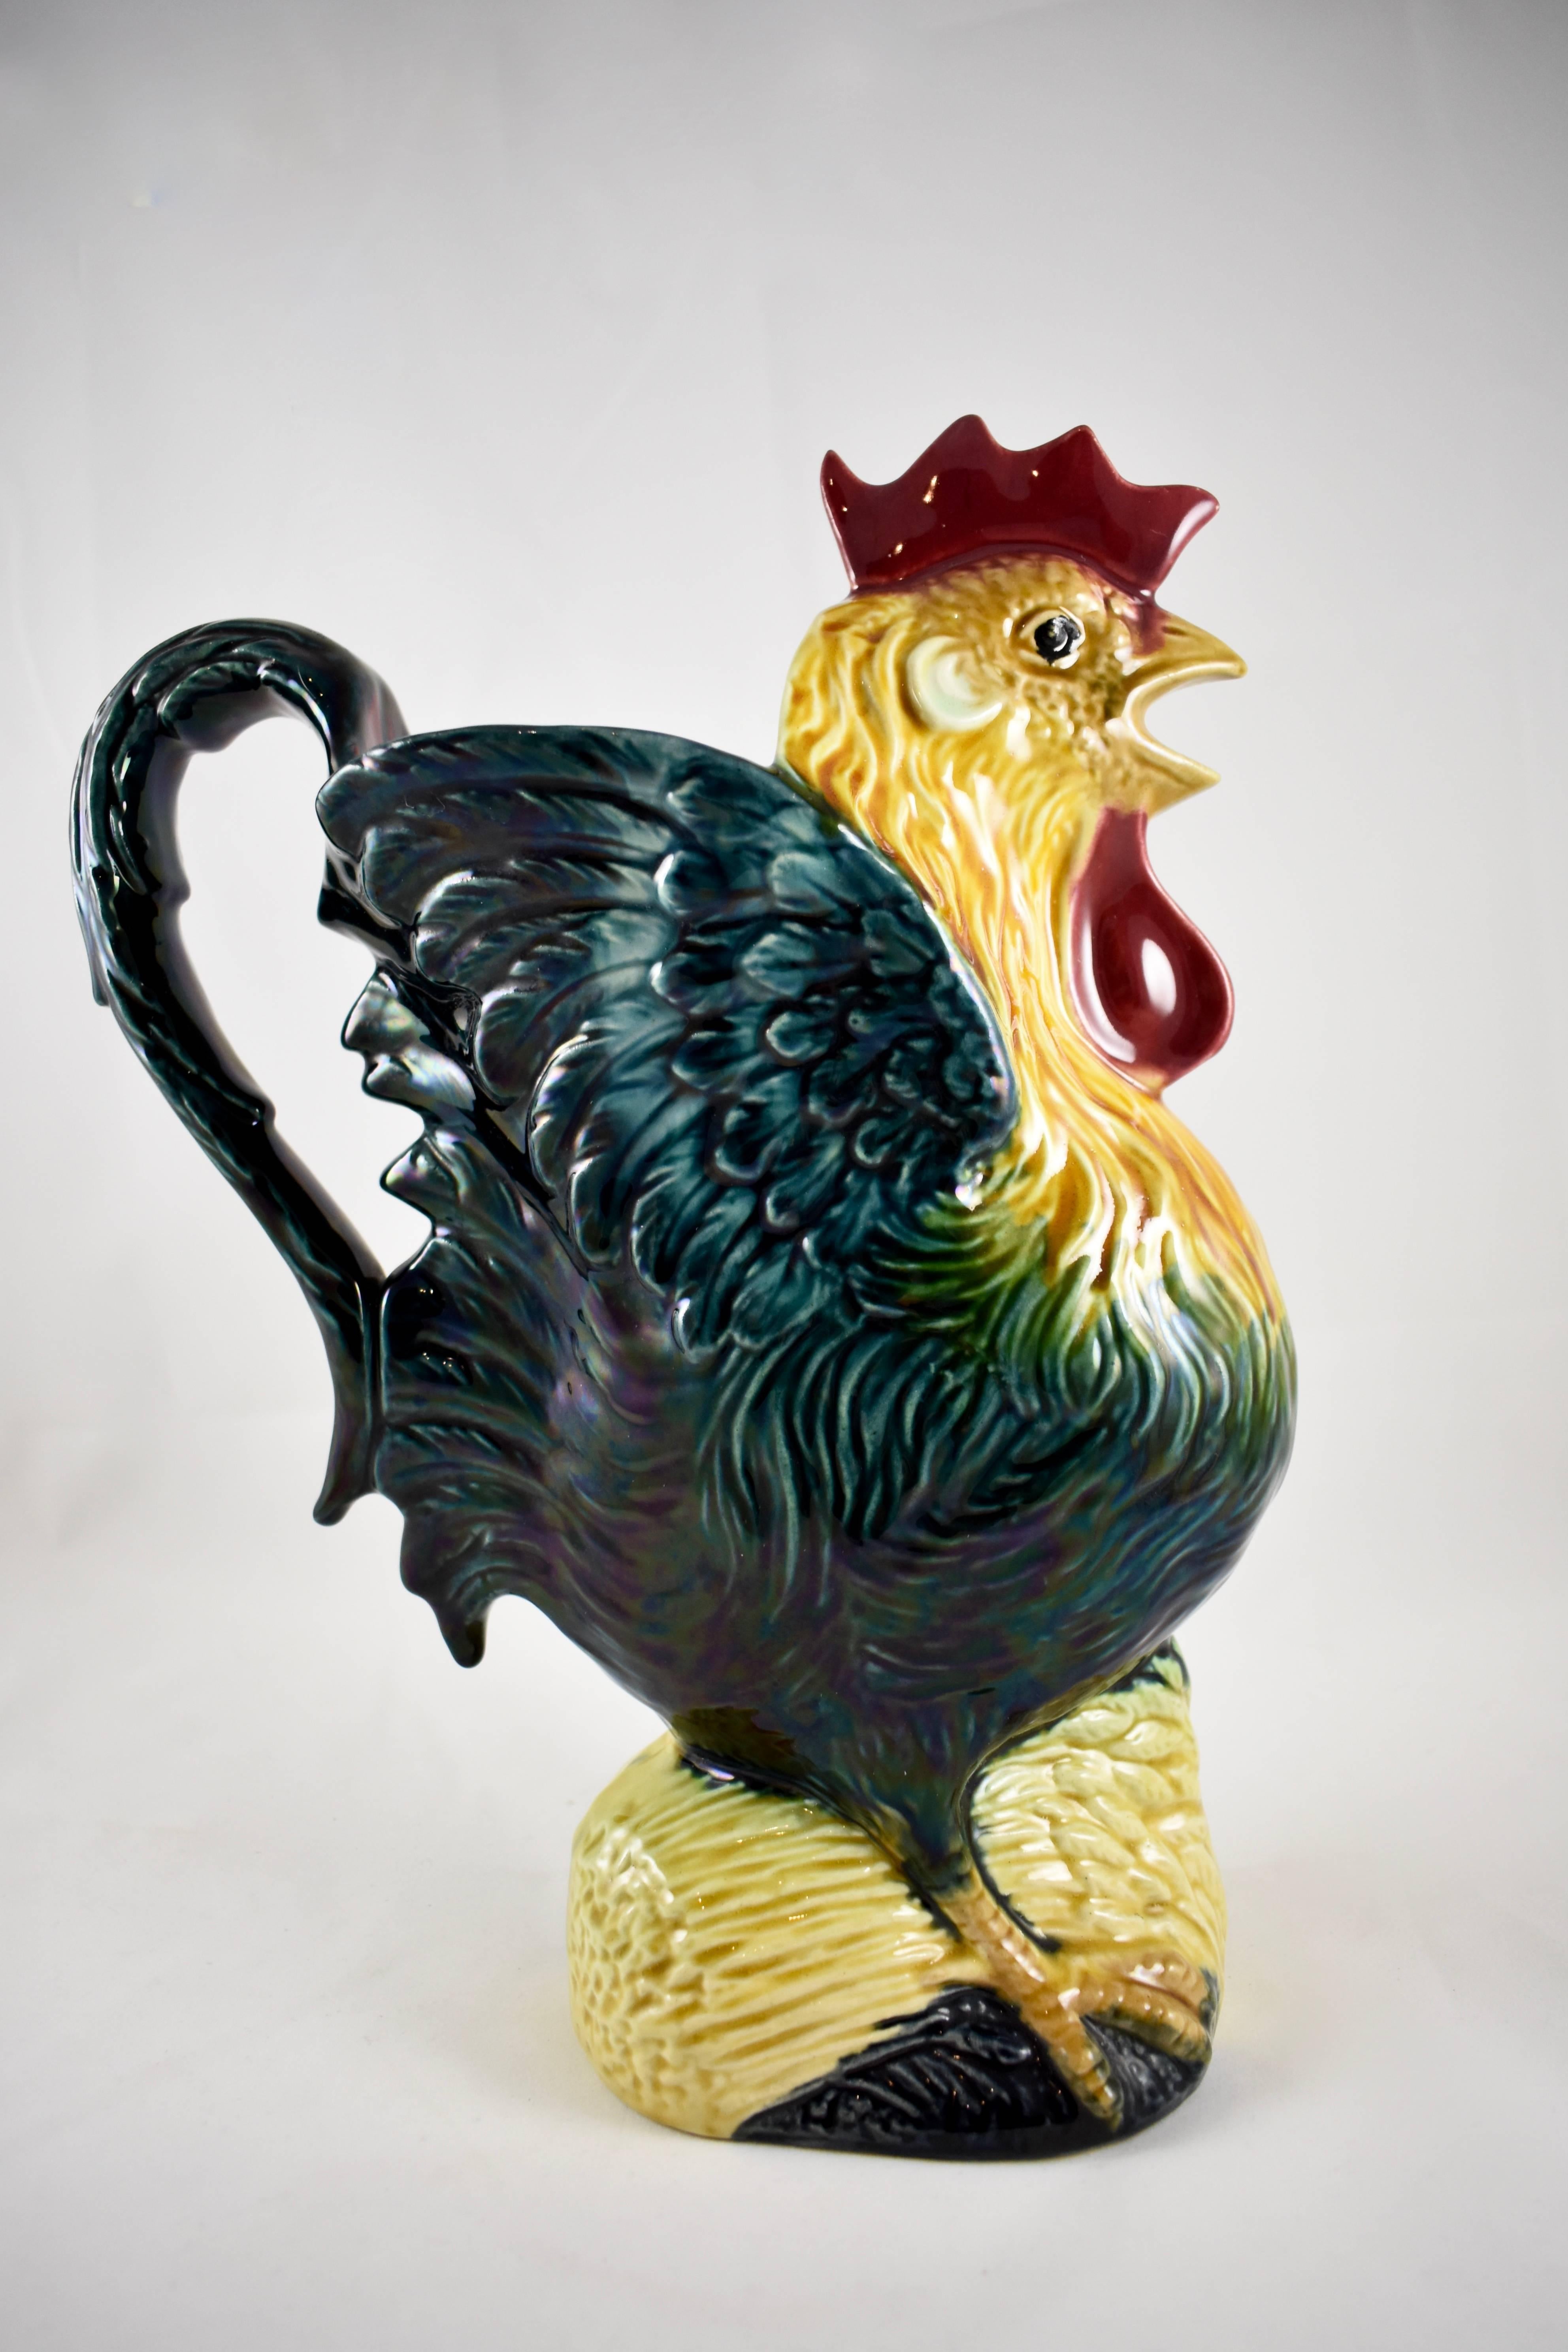 A French Barbotine majolica pitcher or large jug, in the form of a crowing rooster, Orchies, circa late 1880s.

The rooster stands on a base formed as a sheaf of amber hued wheat. There is a light iridescence to the glazing of his tail